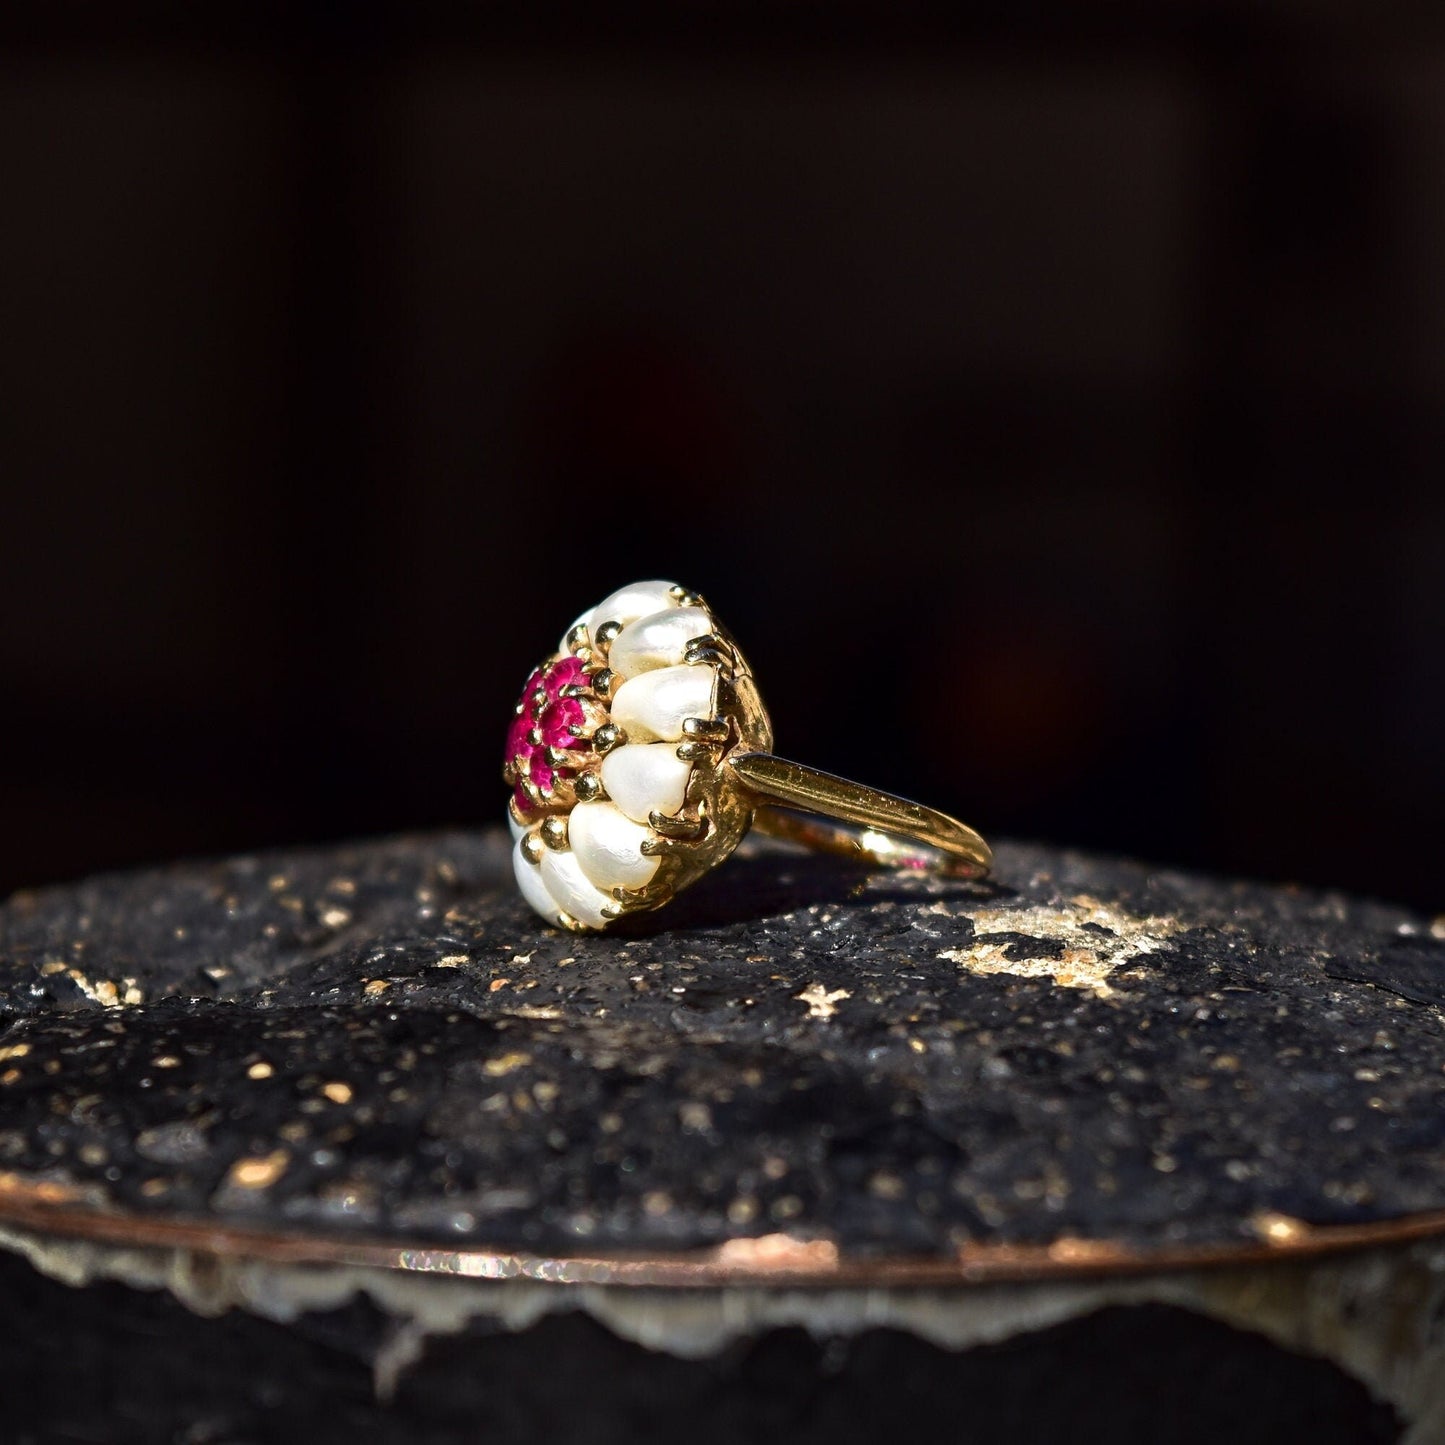 14K yellow gold ring featuring a floral cluster design with white pearls and pink rubies, crafted in a dome bombe style, size 9 US, vintage estate jewelry